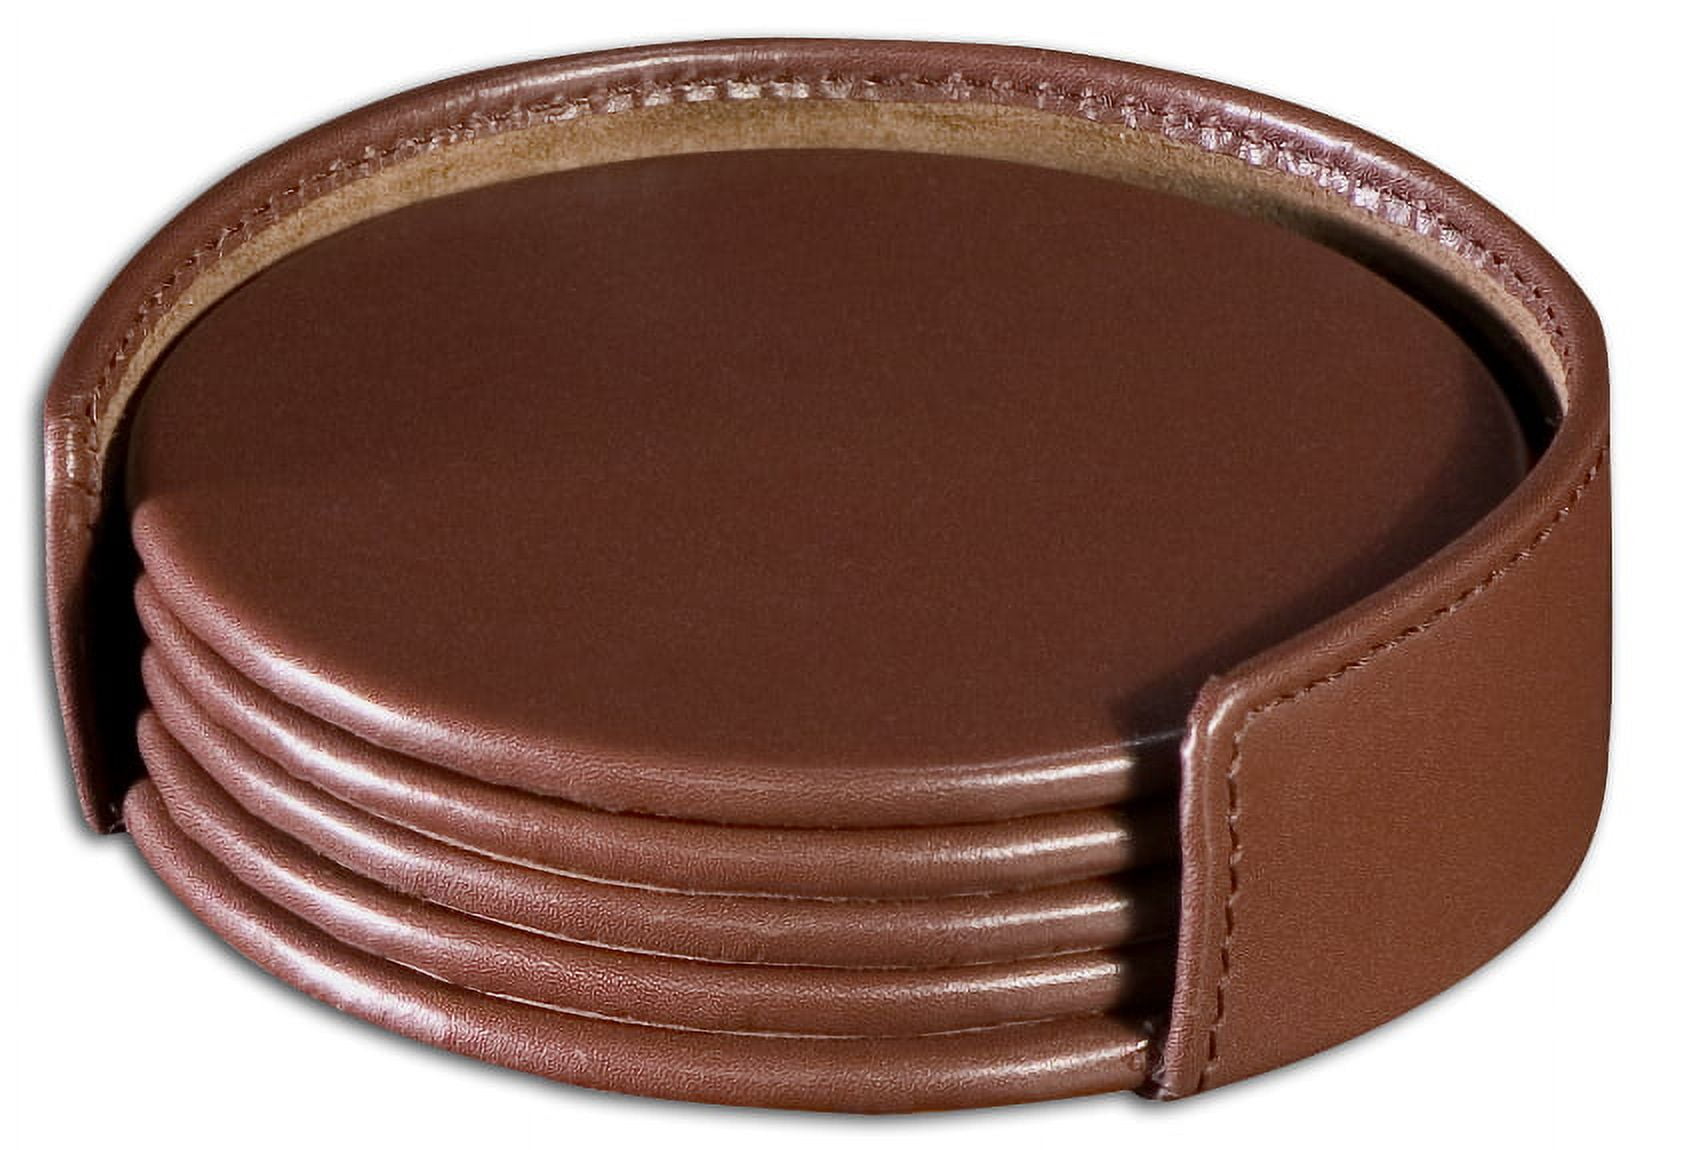 A3418 Chocolate Brown Leatherette 4 Coaster Set With Holder